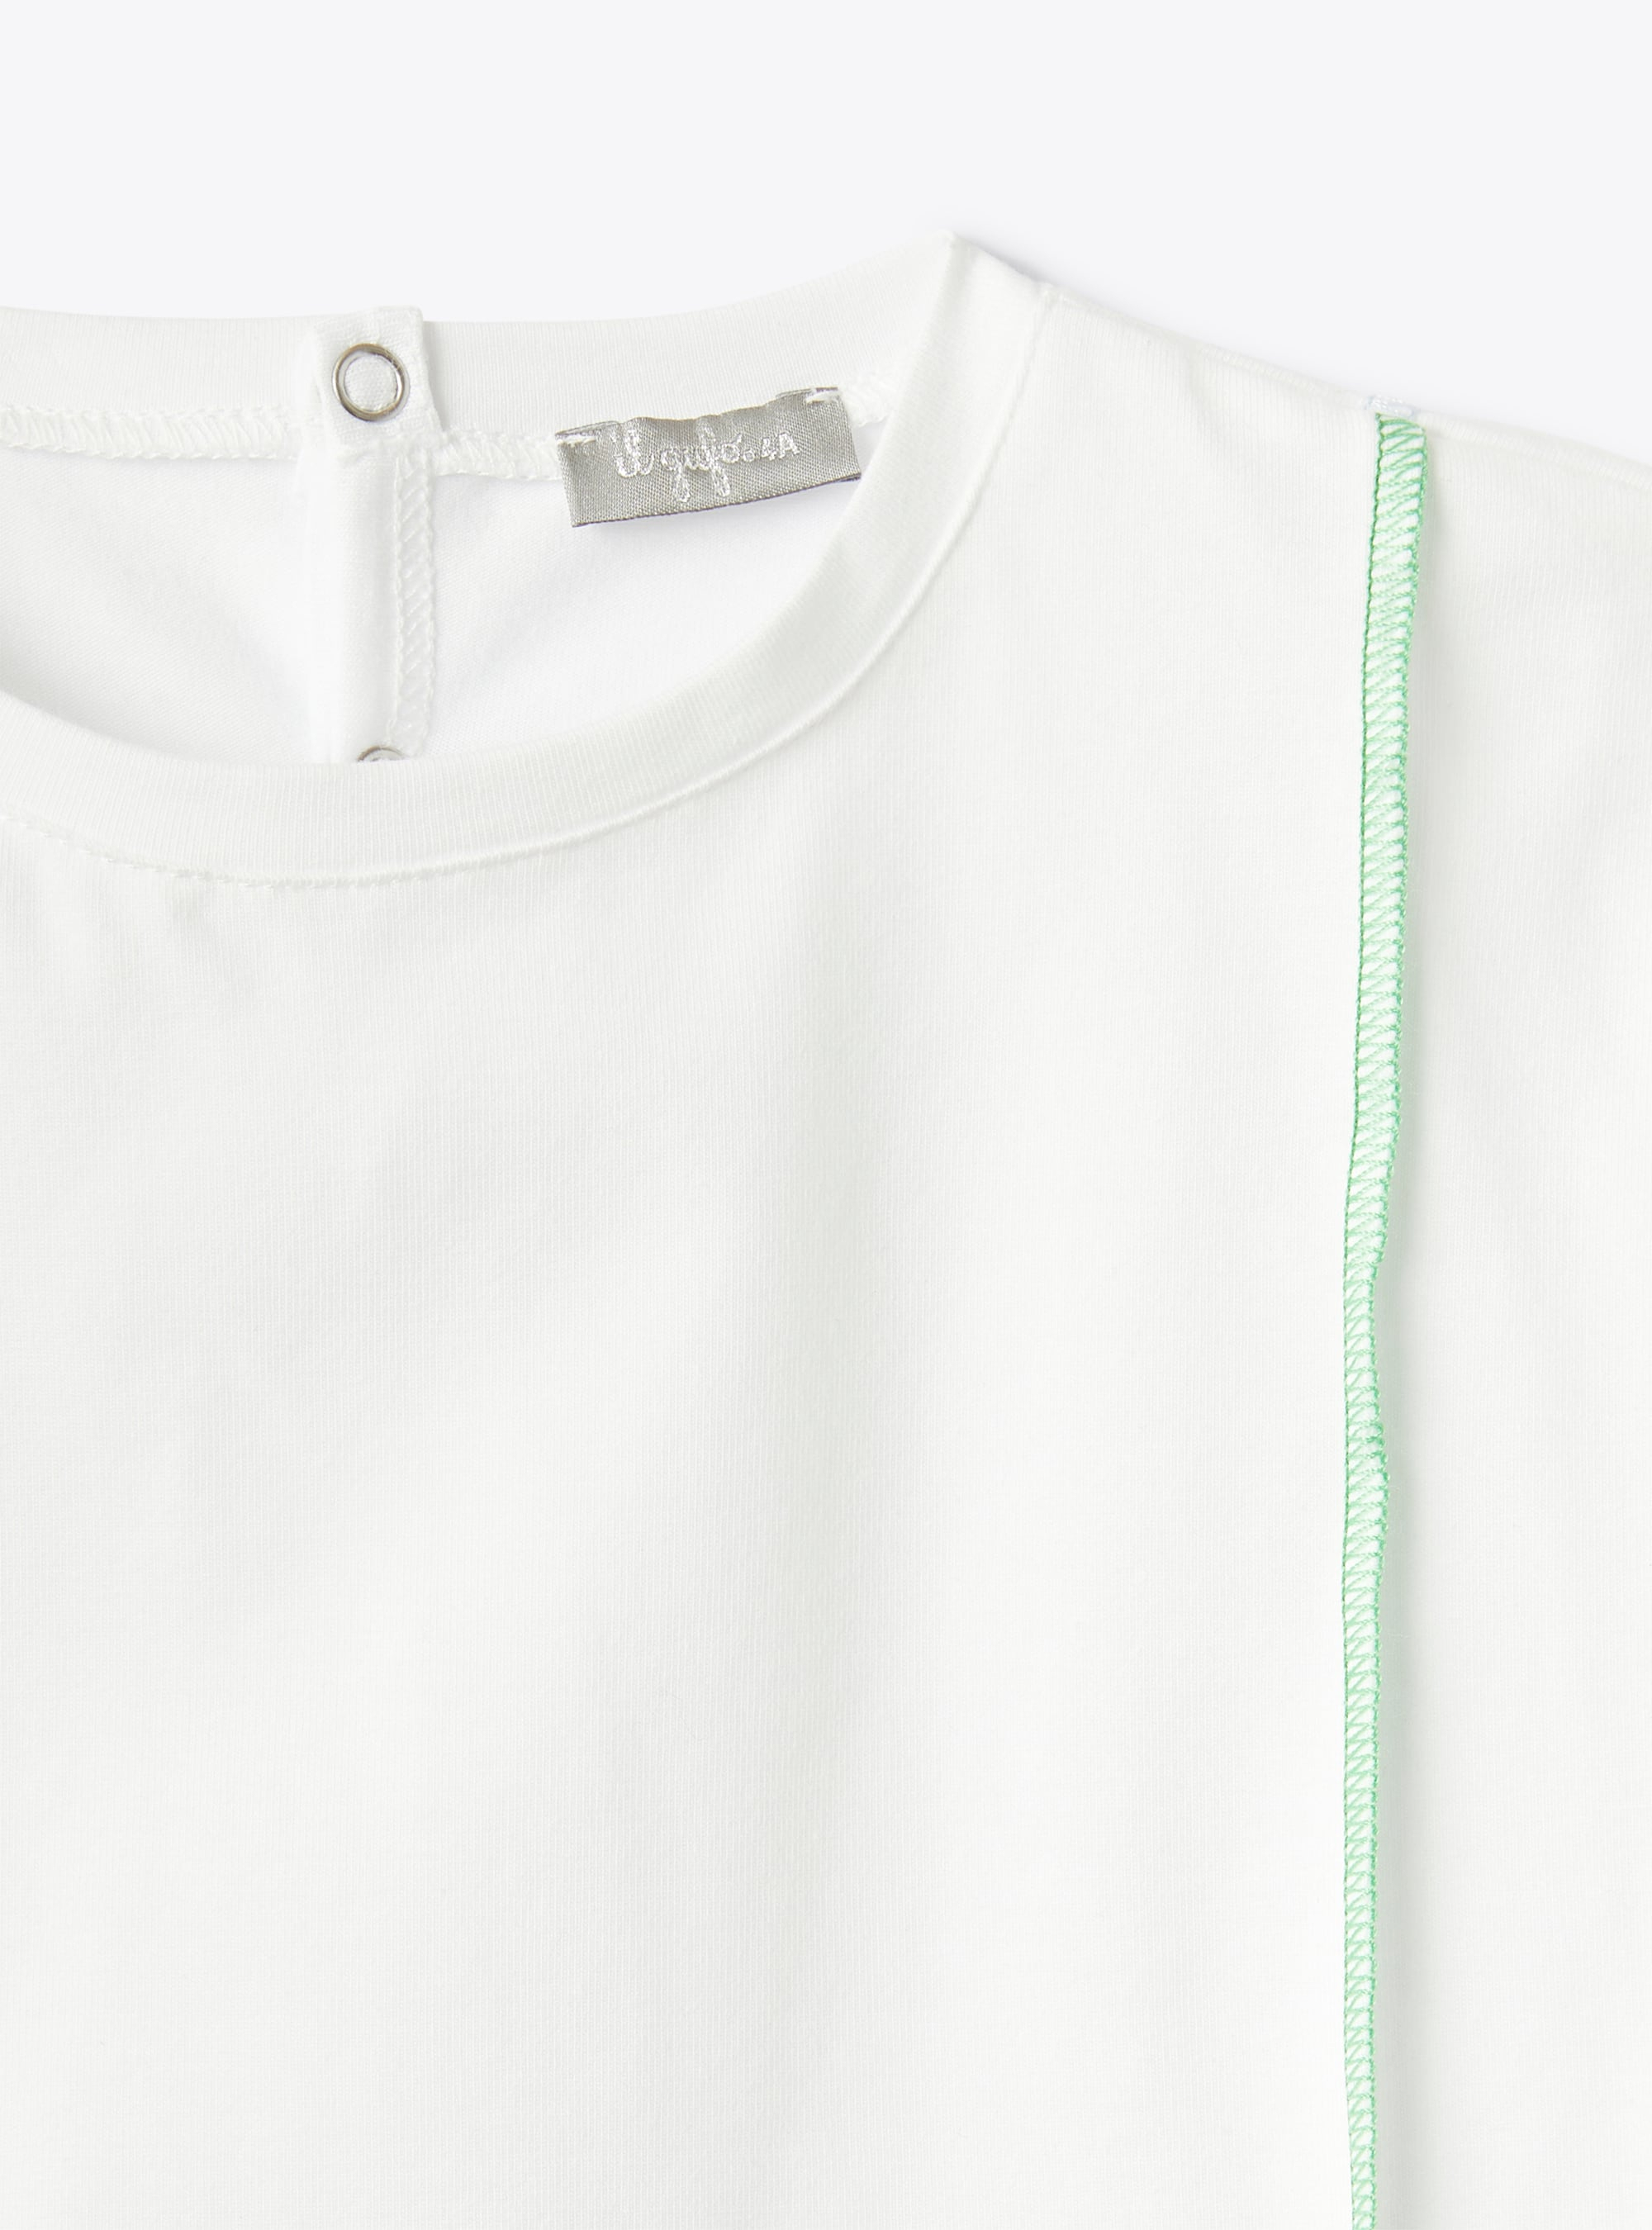 White T-shirt with contrasting topstitched details - Beige | Il Gufo